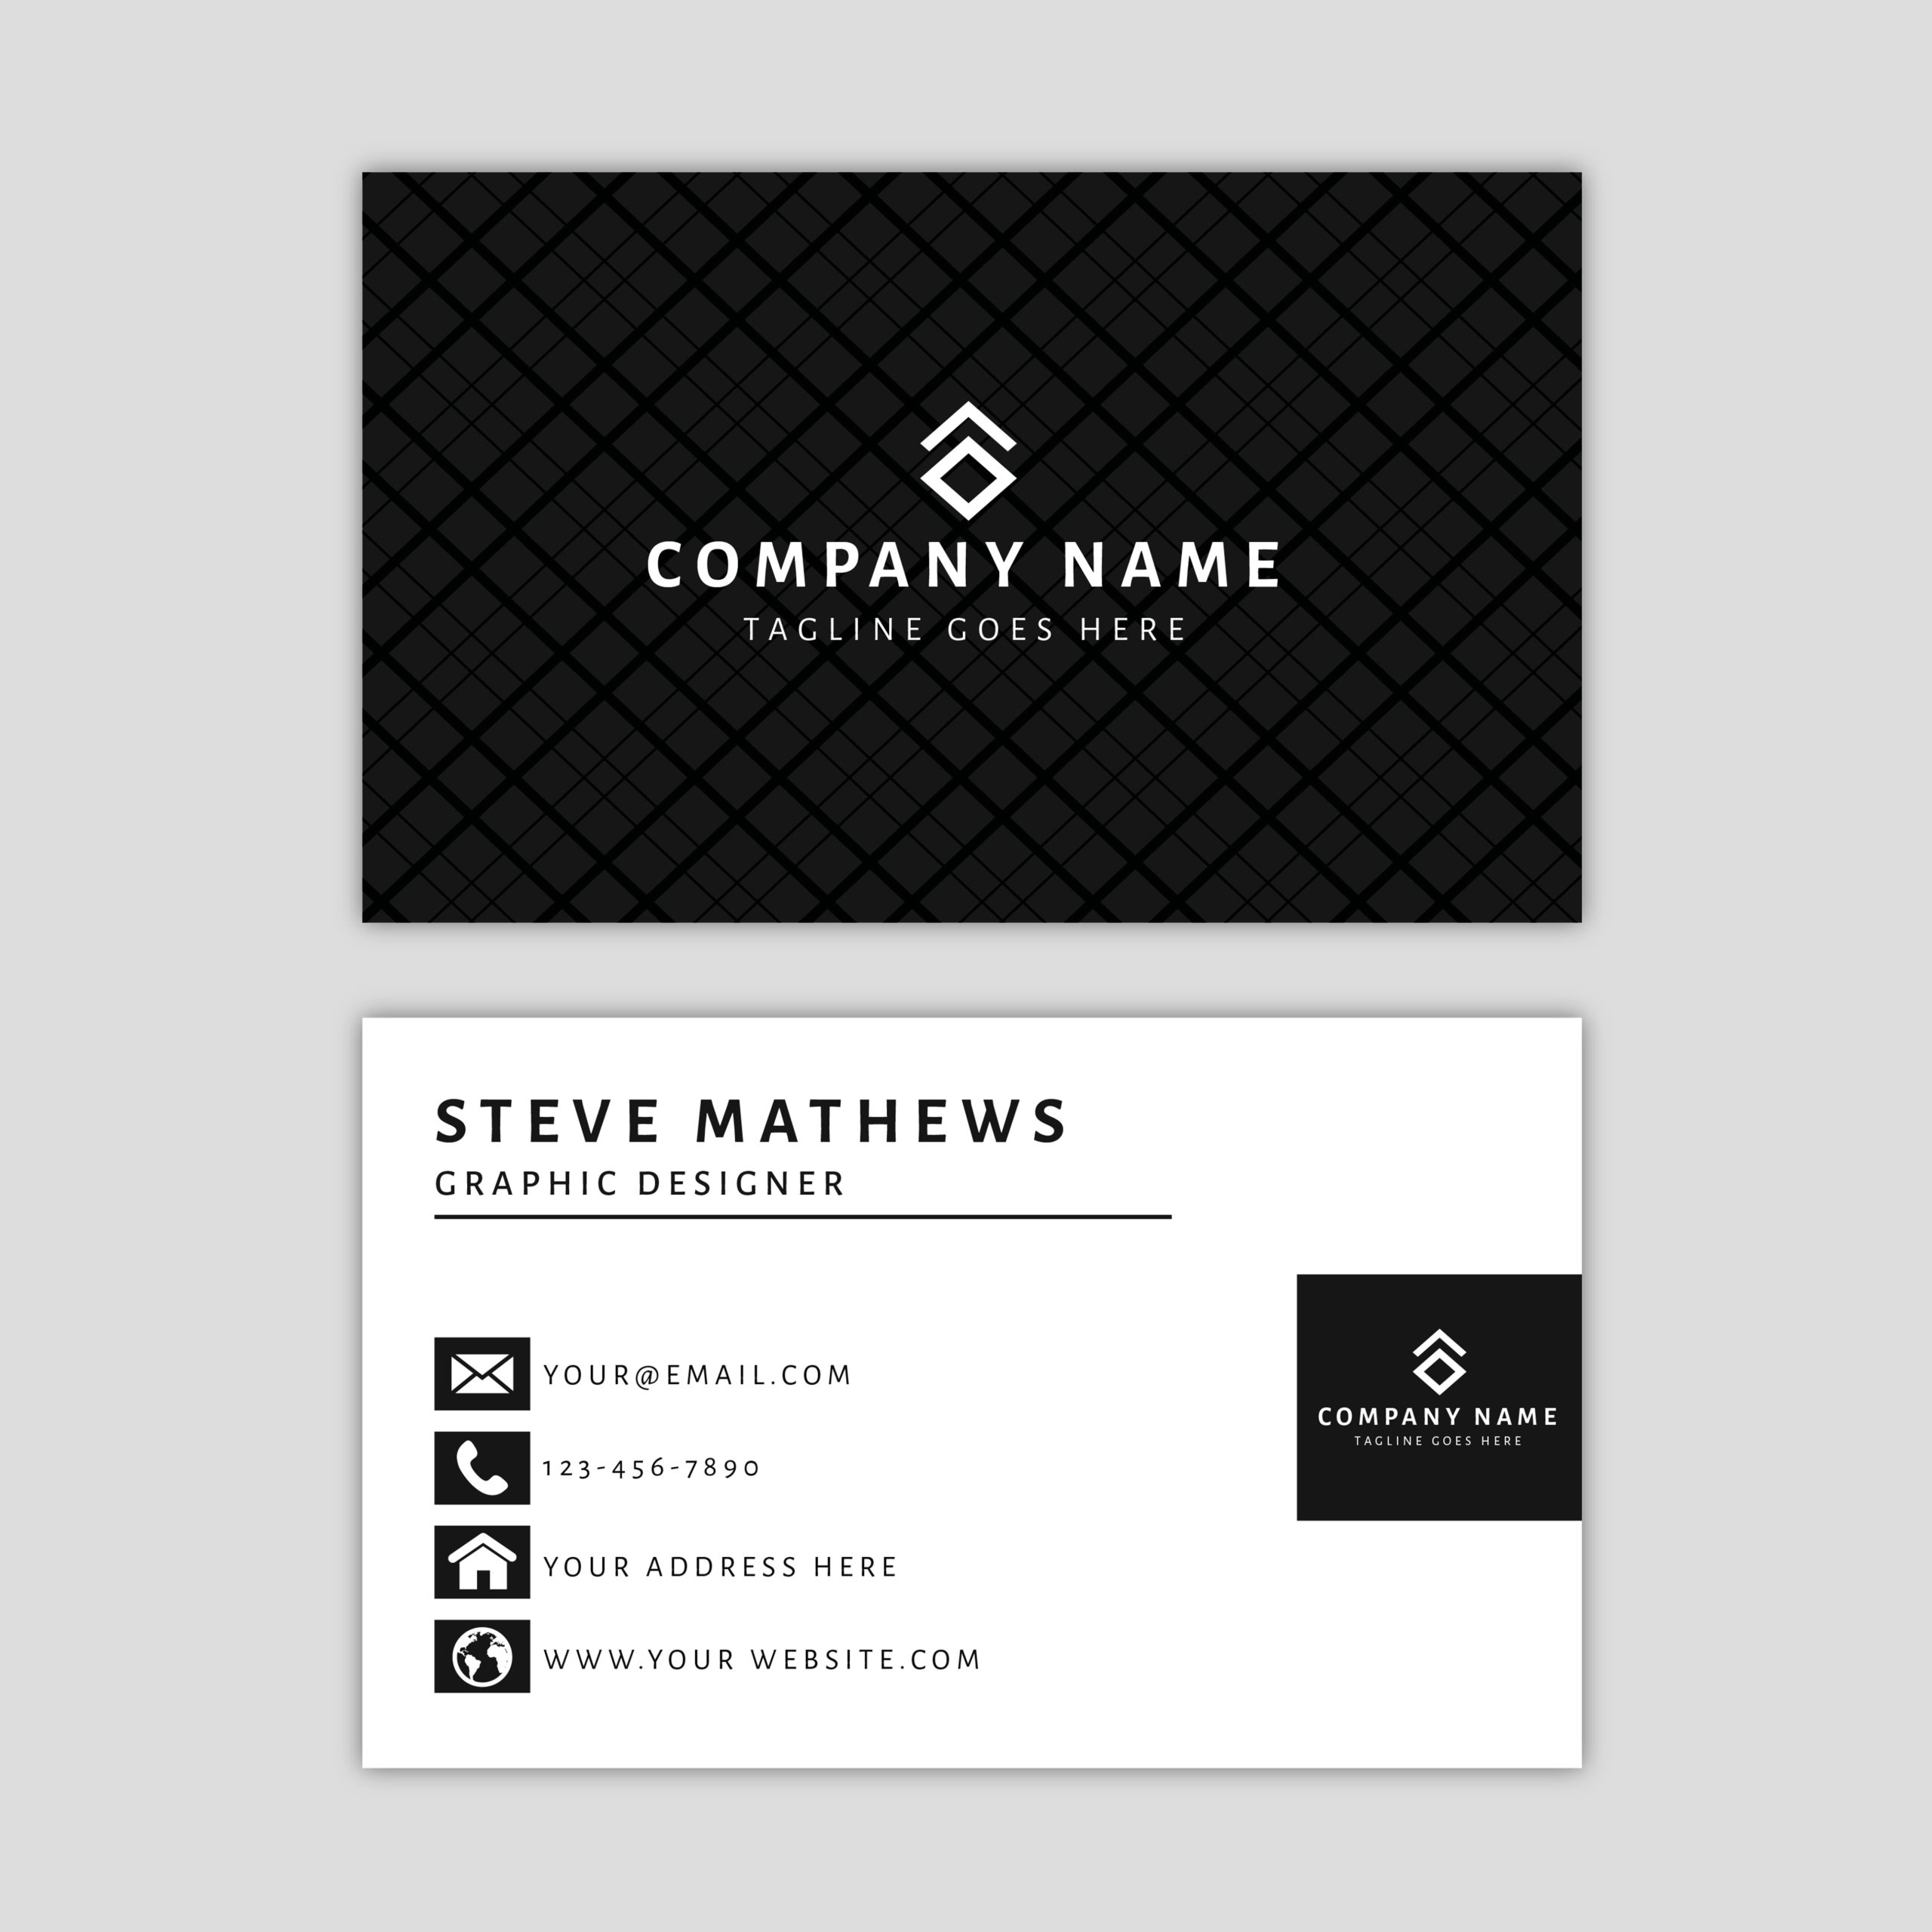 Modern Business Card Template With Abstract Design 670224 Vector Art At Vecteezy Inside Buisness Card Template